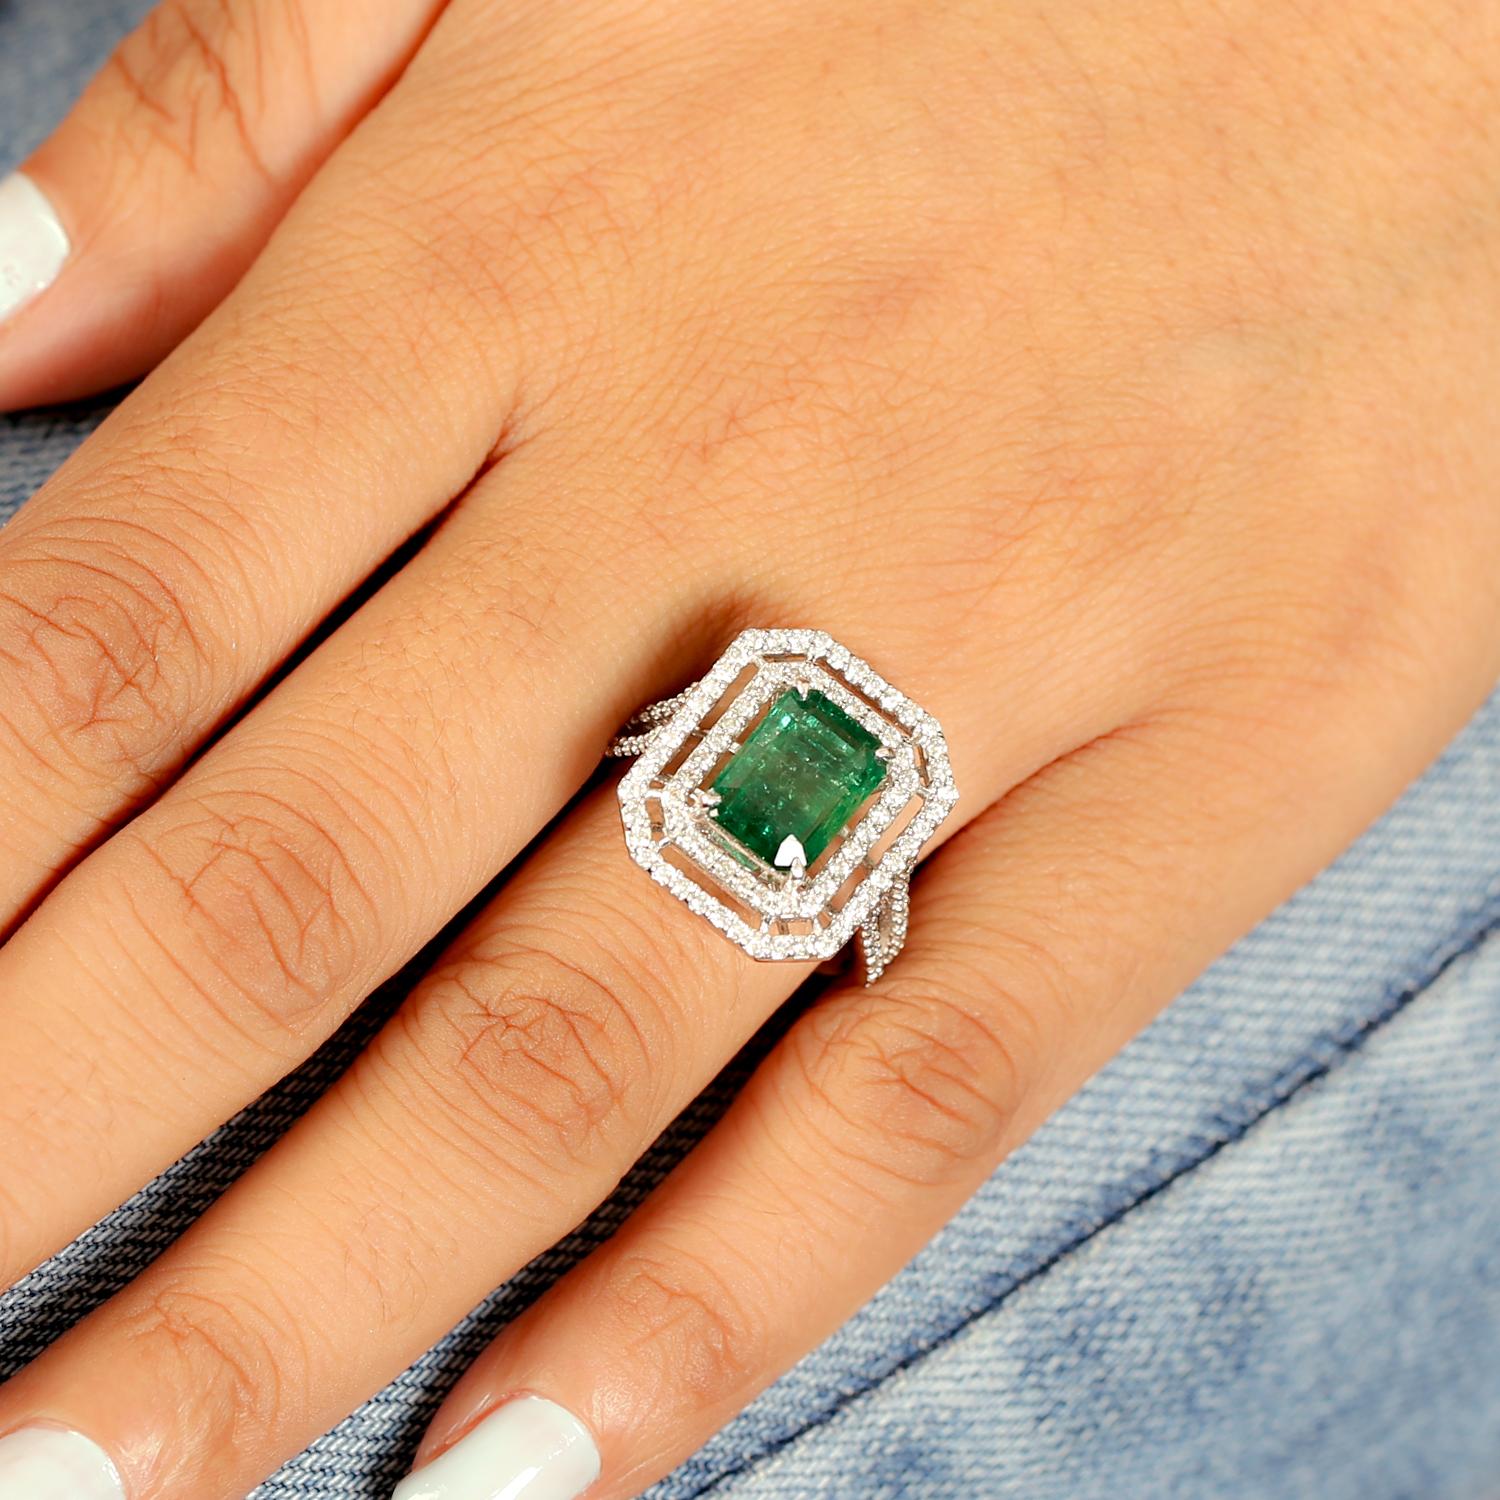 Mixed Cut Octogen Cut Zambian Emerald Ring with Diamonds Made in 14k White Gold For Sale